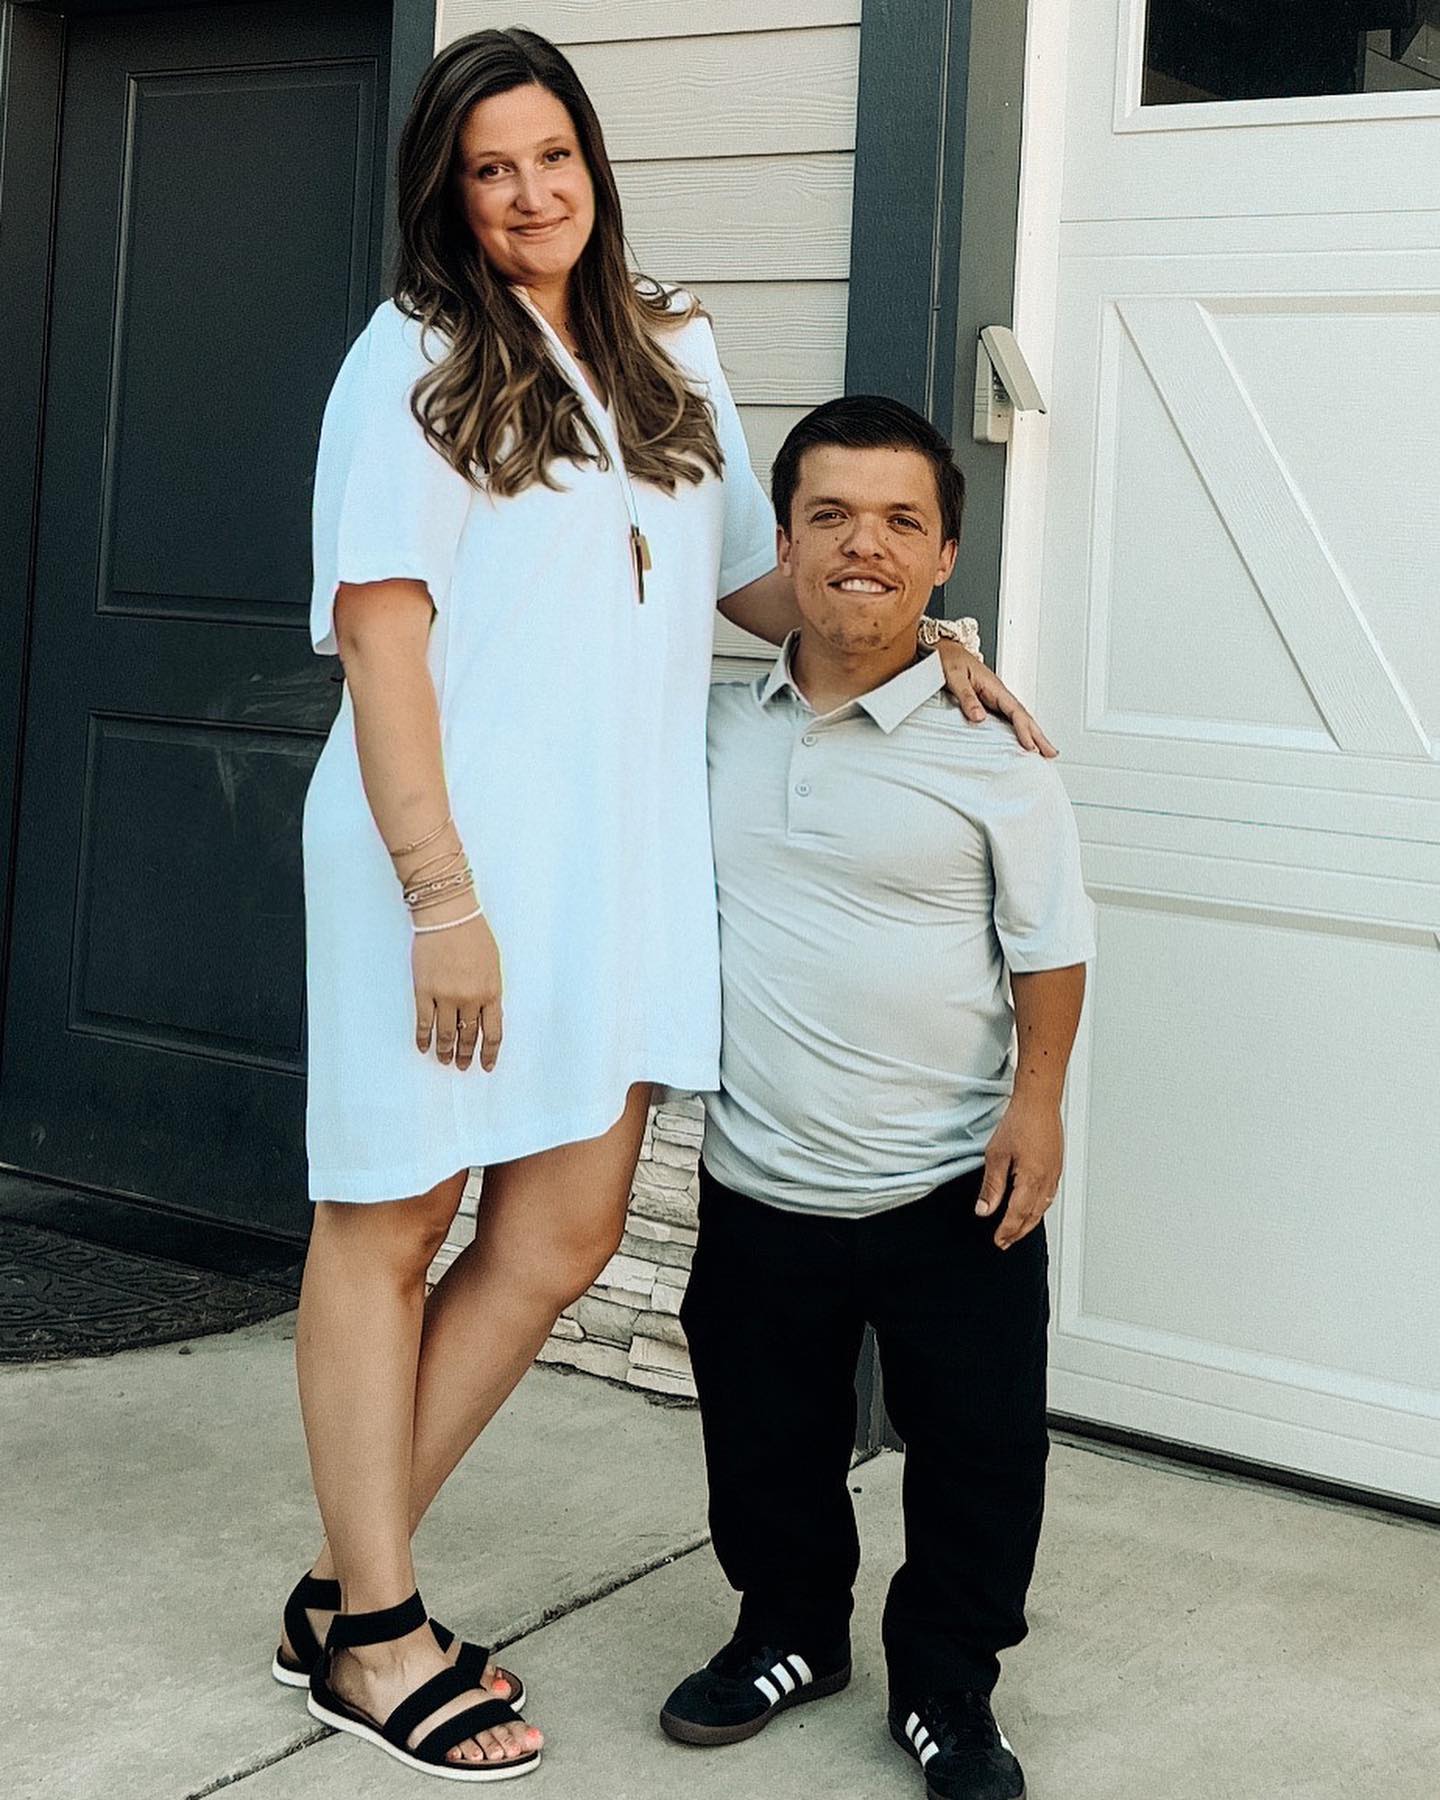 Zach and Tori Roloff Talk About Possibility of Homeschooling Their 3 Kids: ‘Every Child Is Different’